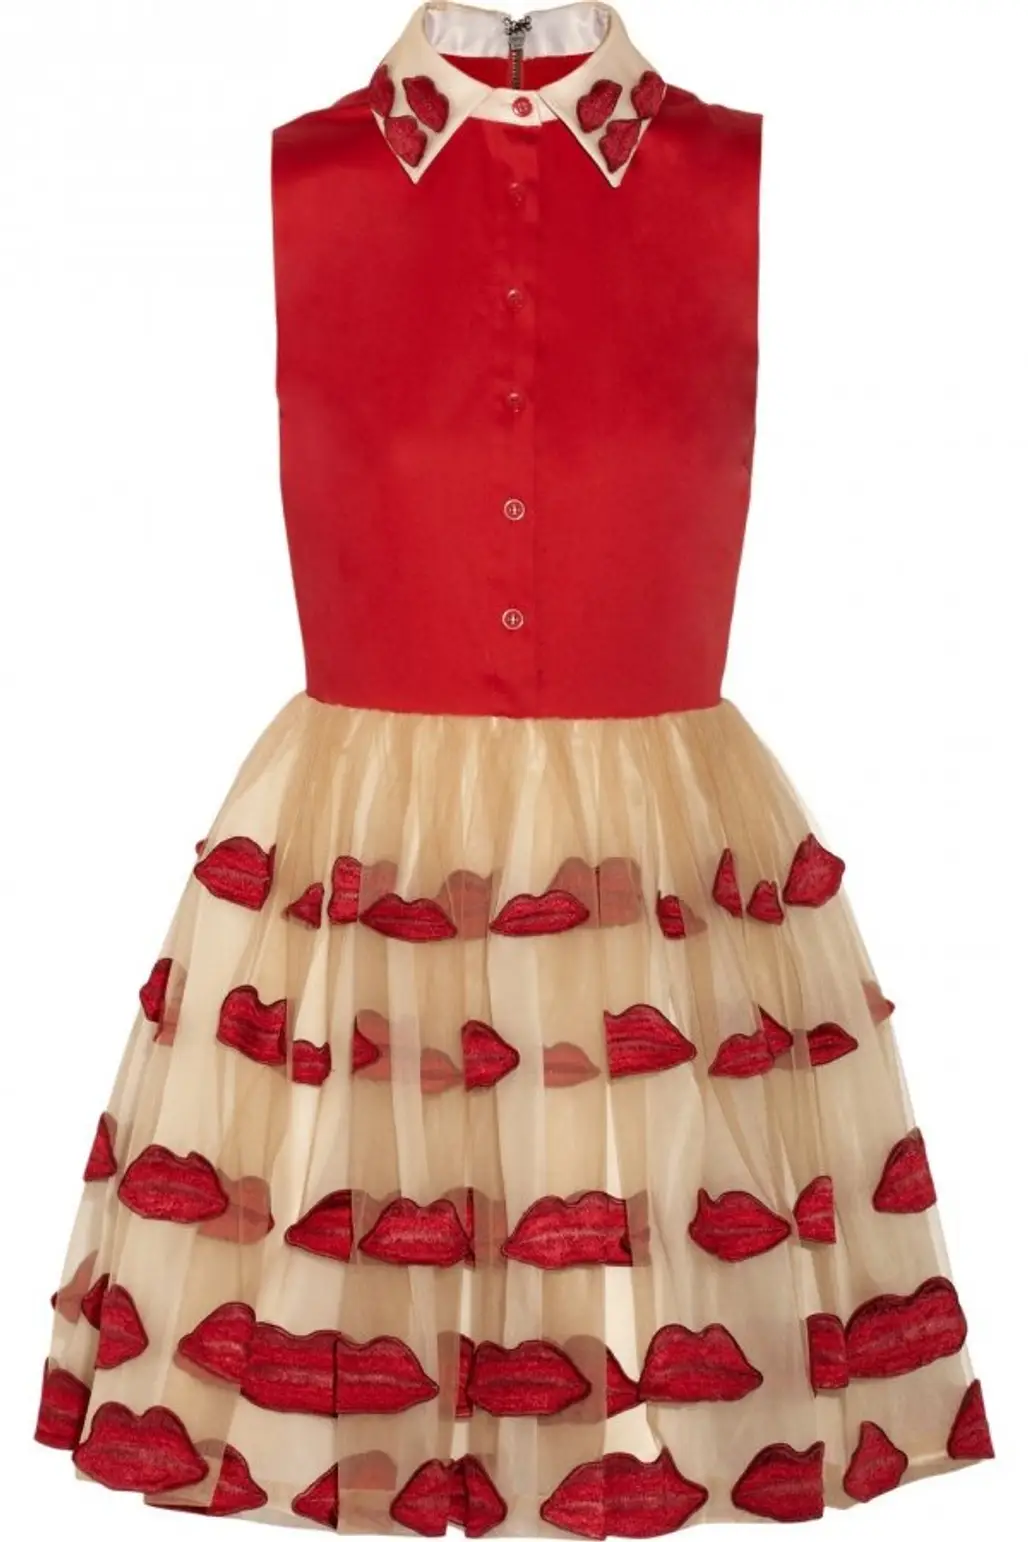 Alice + Olivia Pout Stretch-Cotton and Tulle Dress